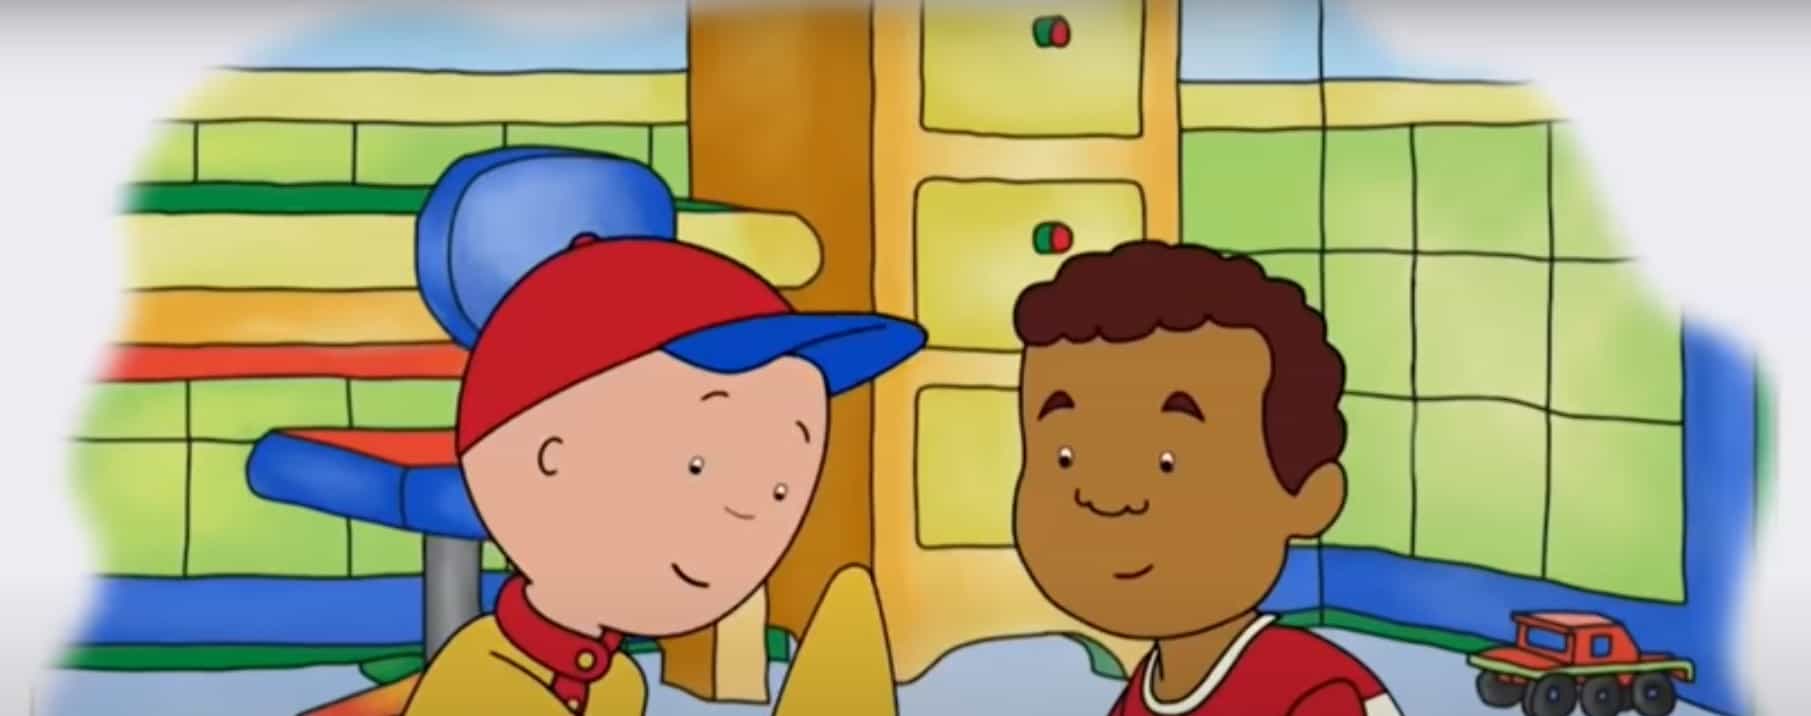 Why Was Caillou Canceled?